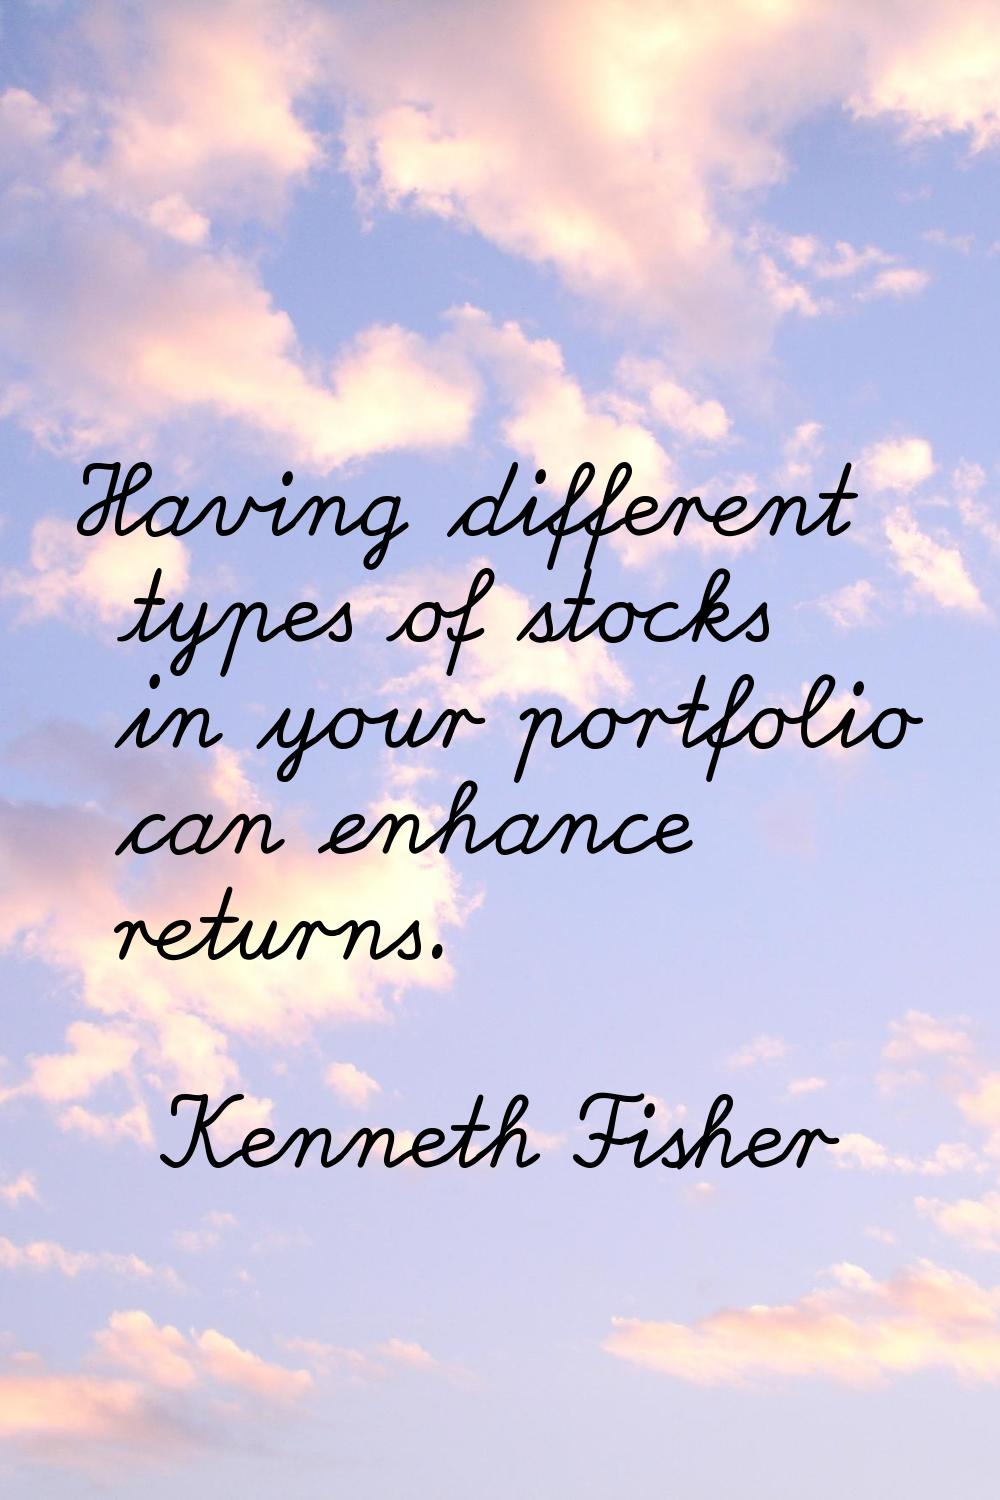 Having different types of stocks in your portfolio can enhance returns.